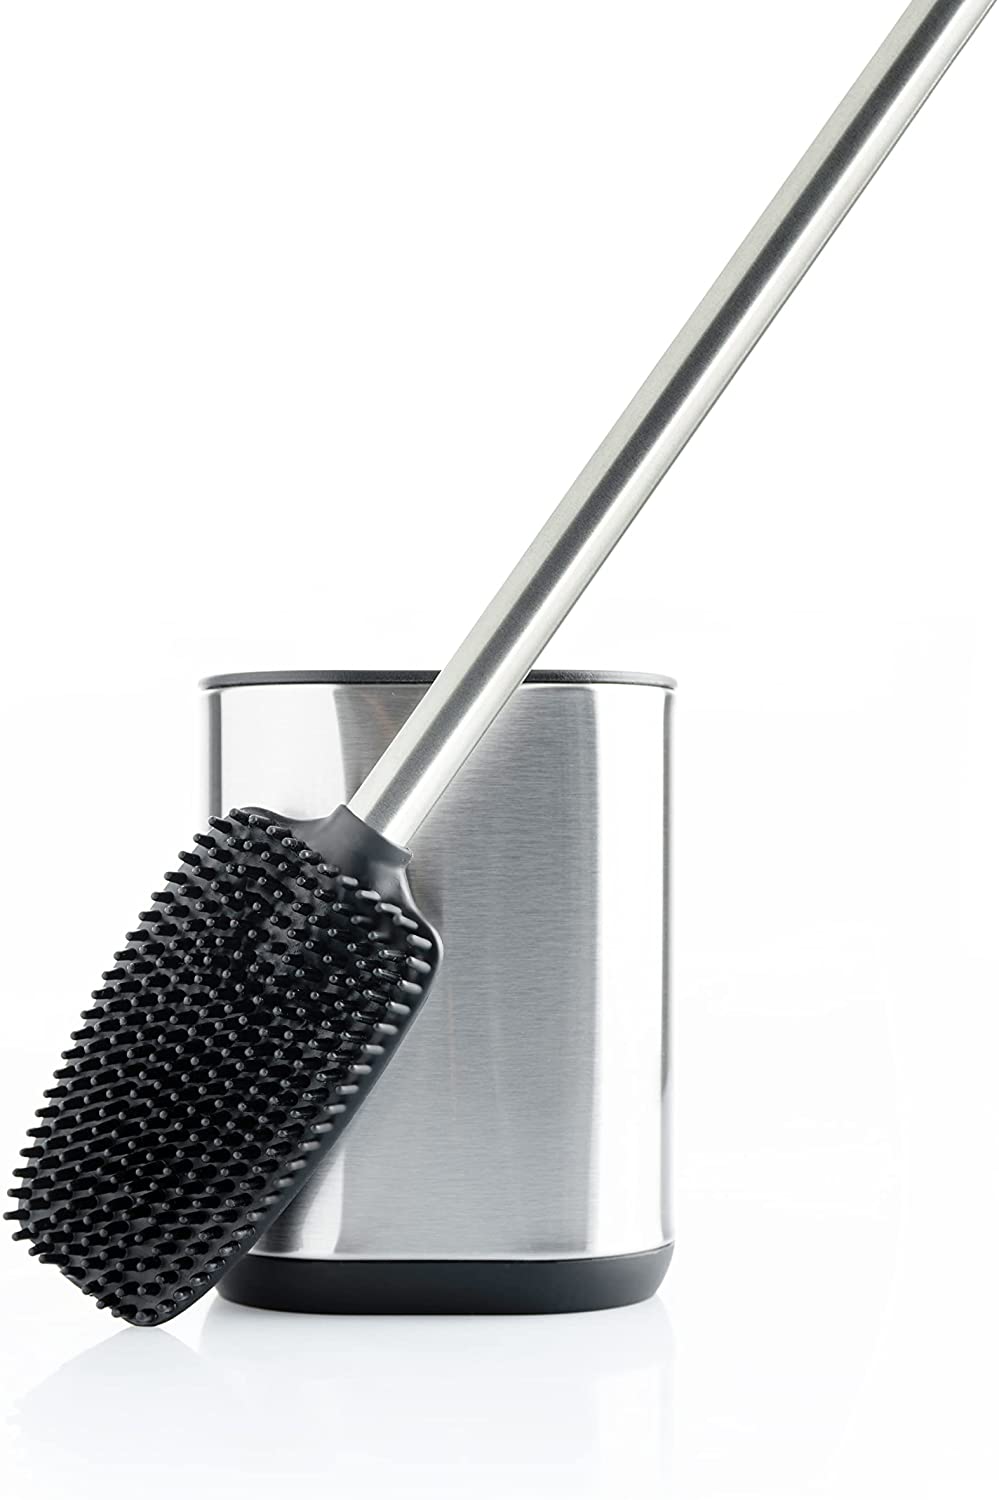 Stainless Steel Silicone Toilet Brush Set